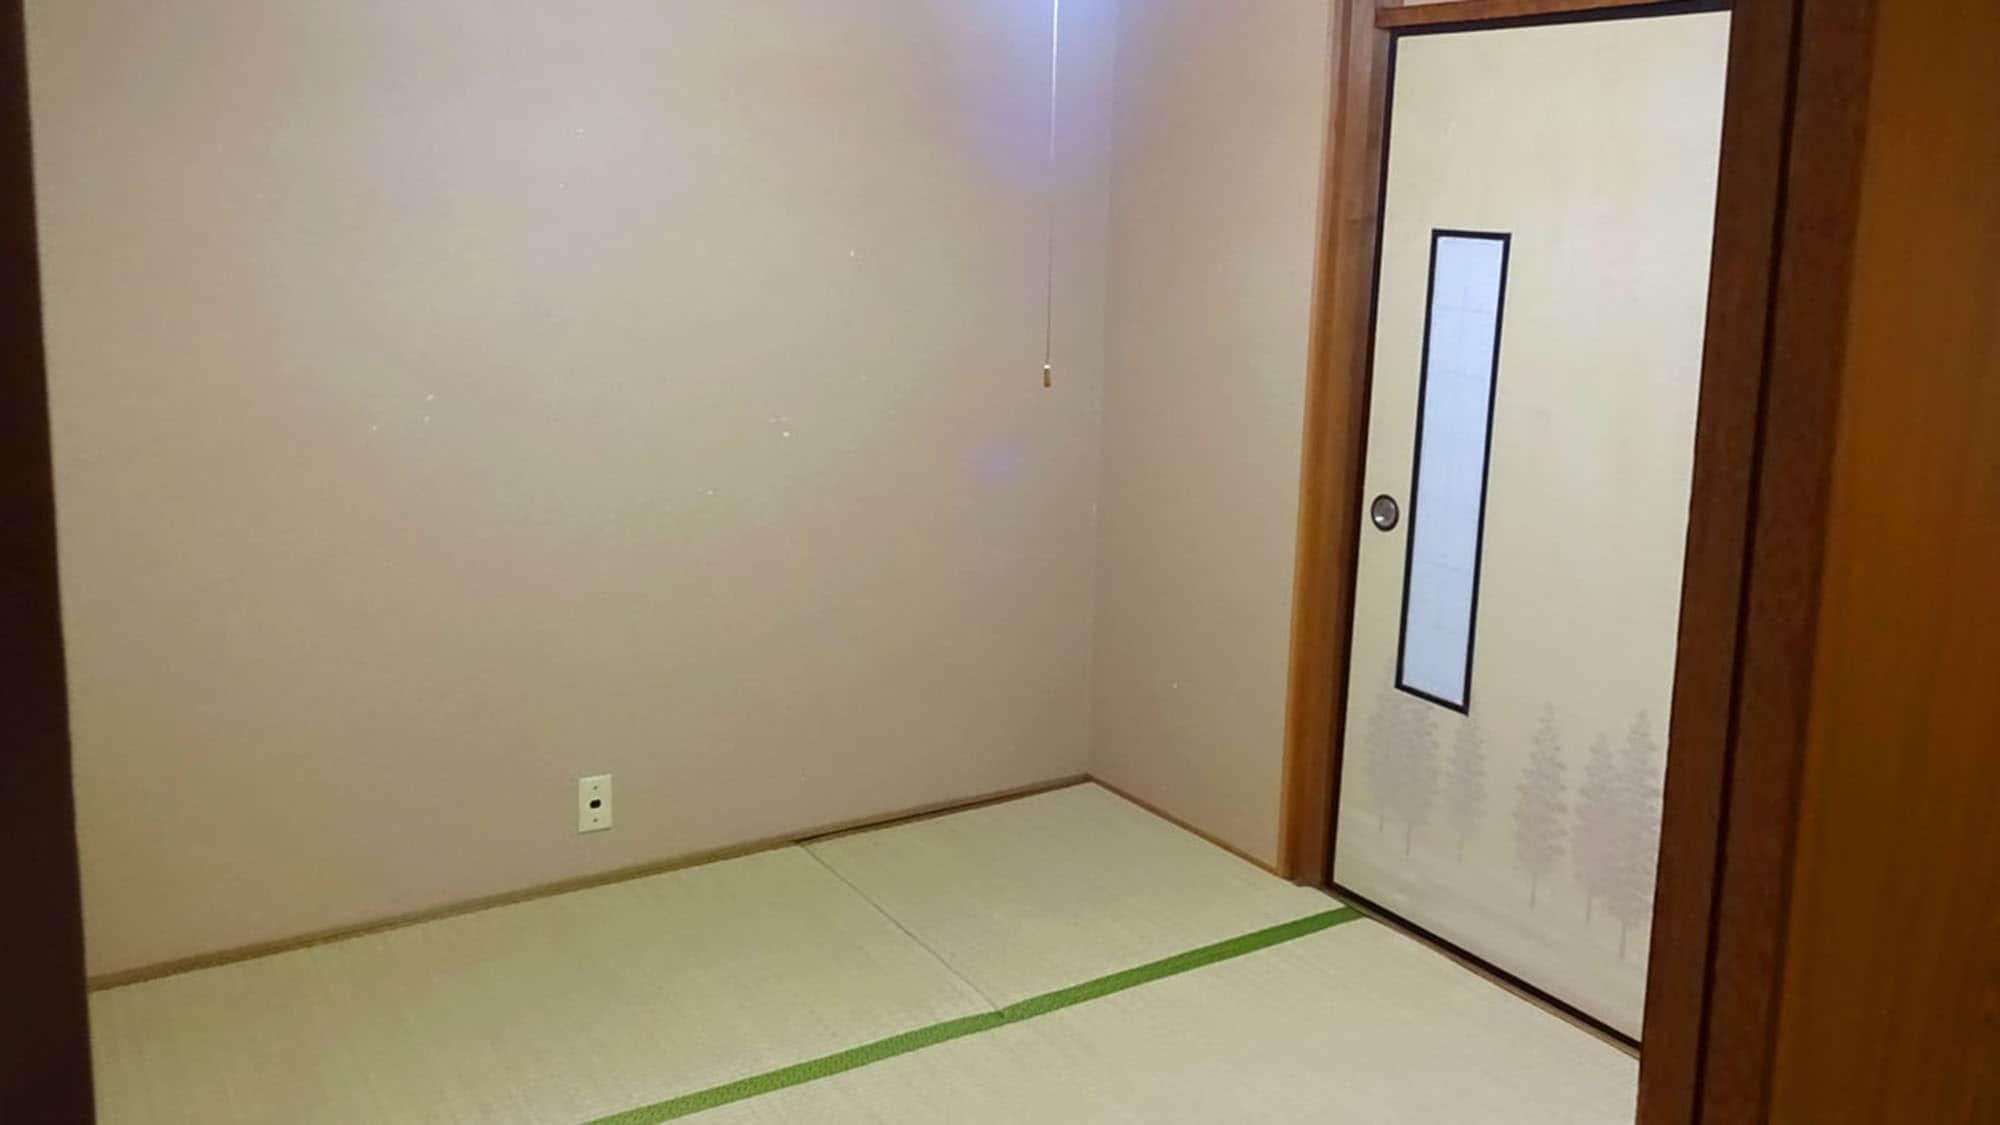 ・ [Japanese-style room 4.5 tatami mats example]: Room for 1 person only